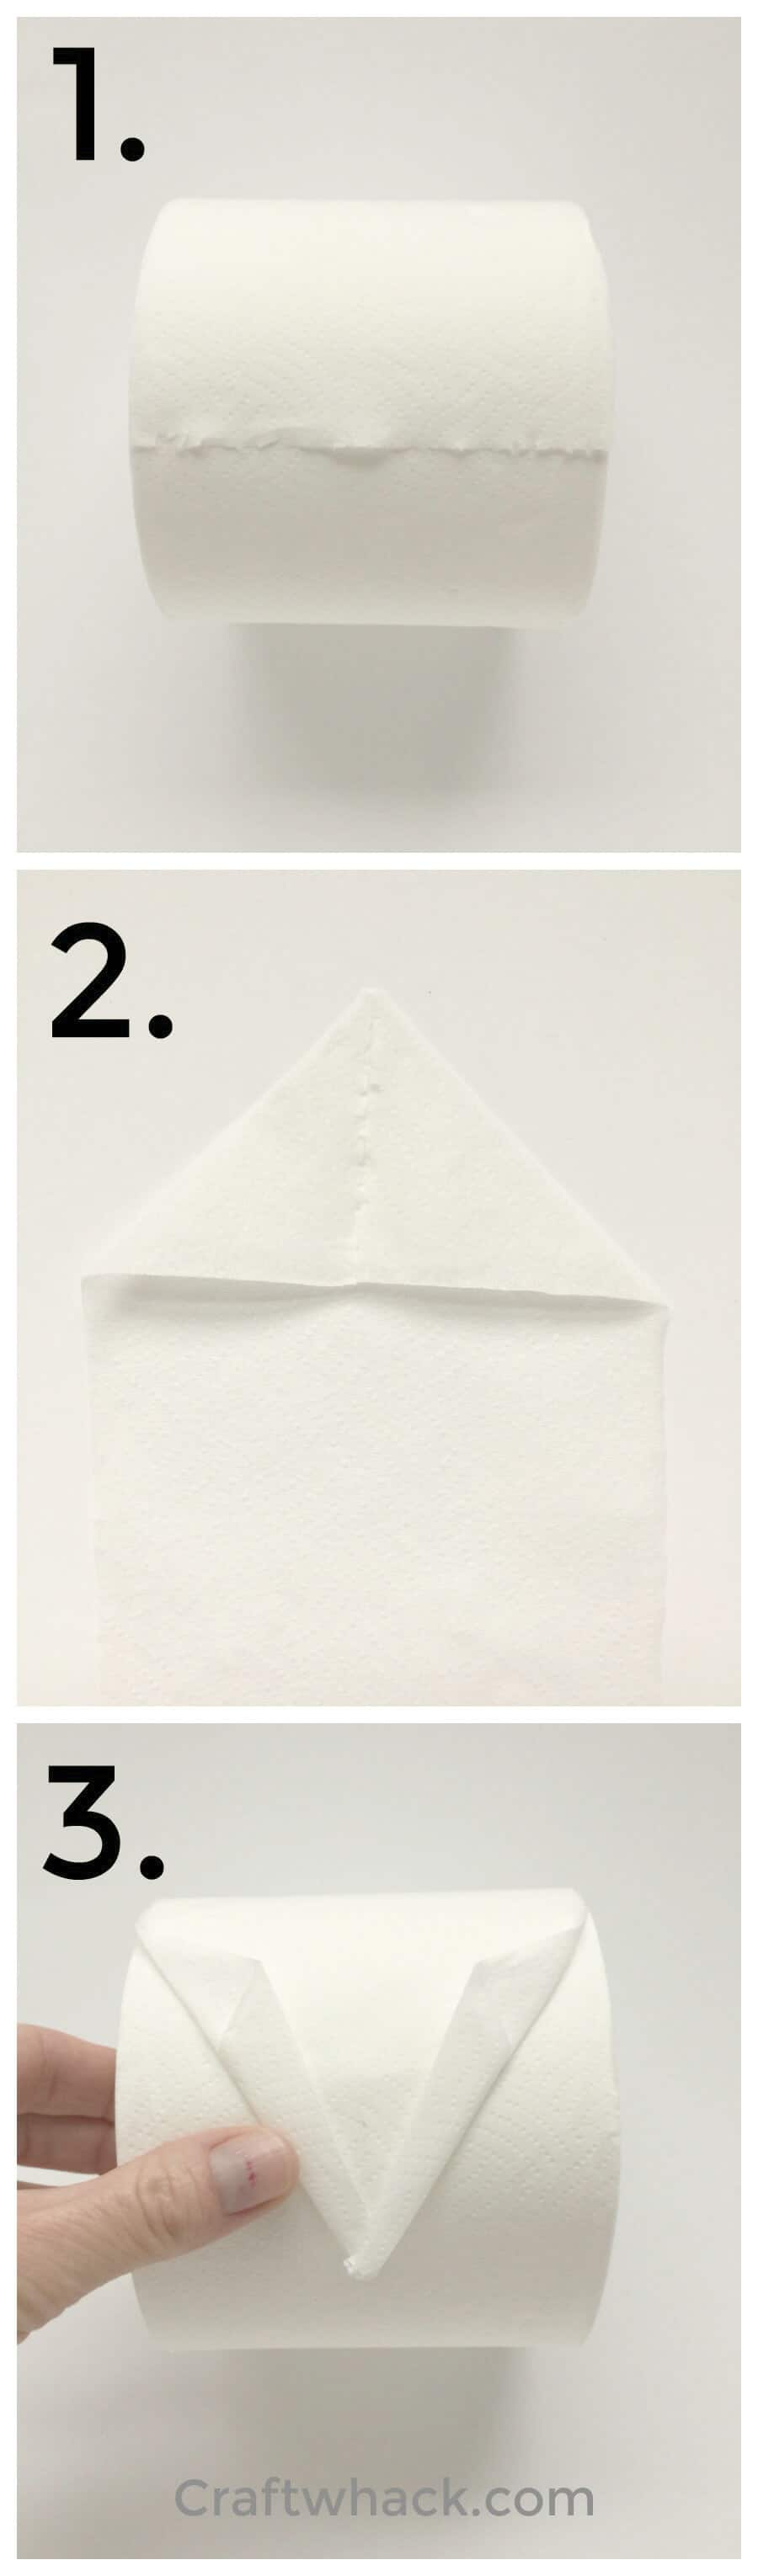 How To Make A Origami Sailboat Ahoy Learn To Fold A Toilet Paper Origami Sailboat Craftwhack